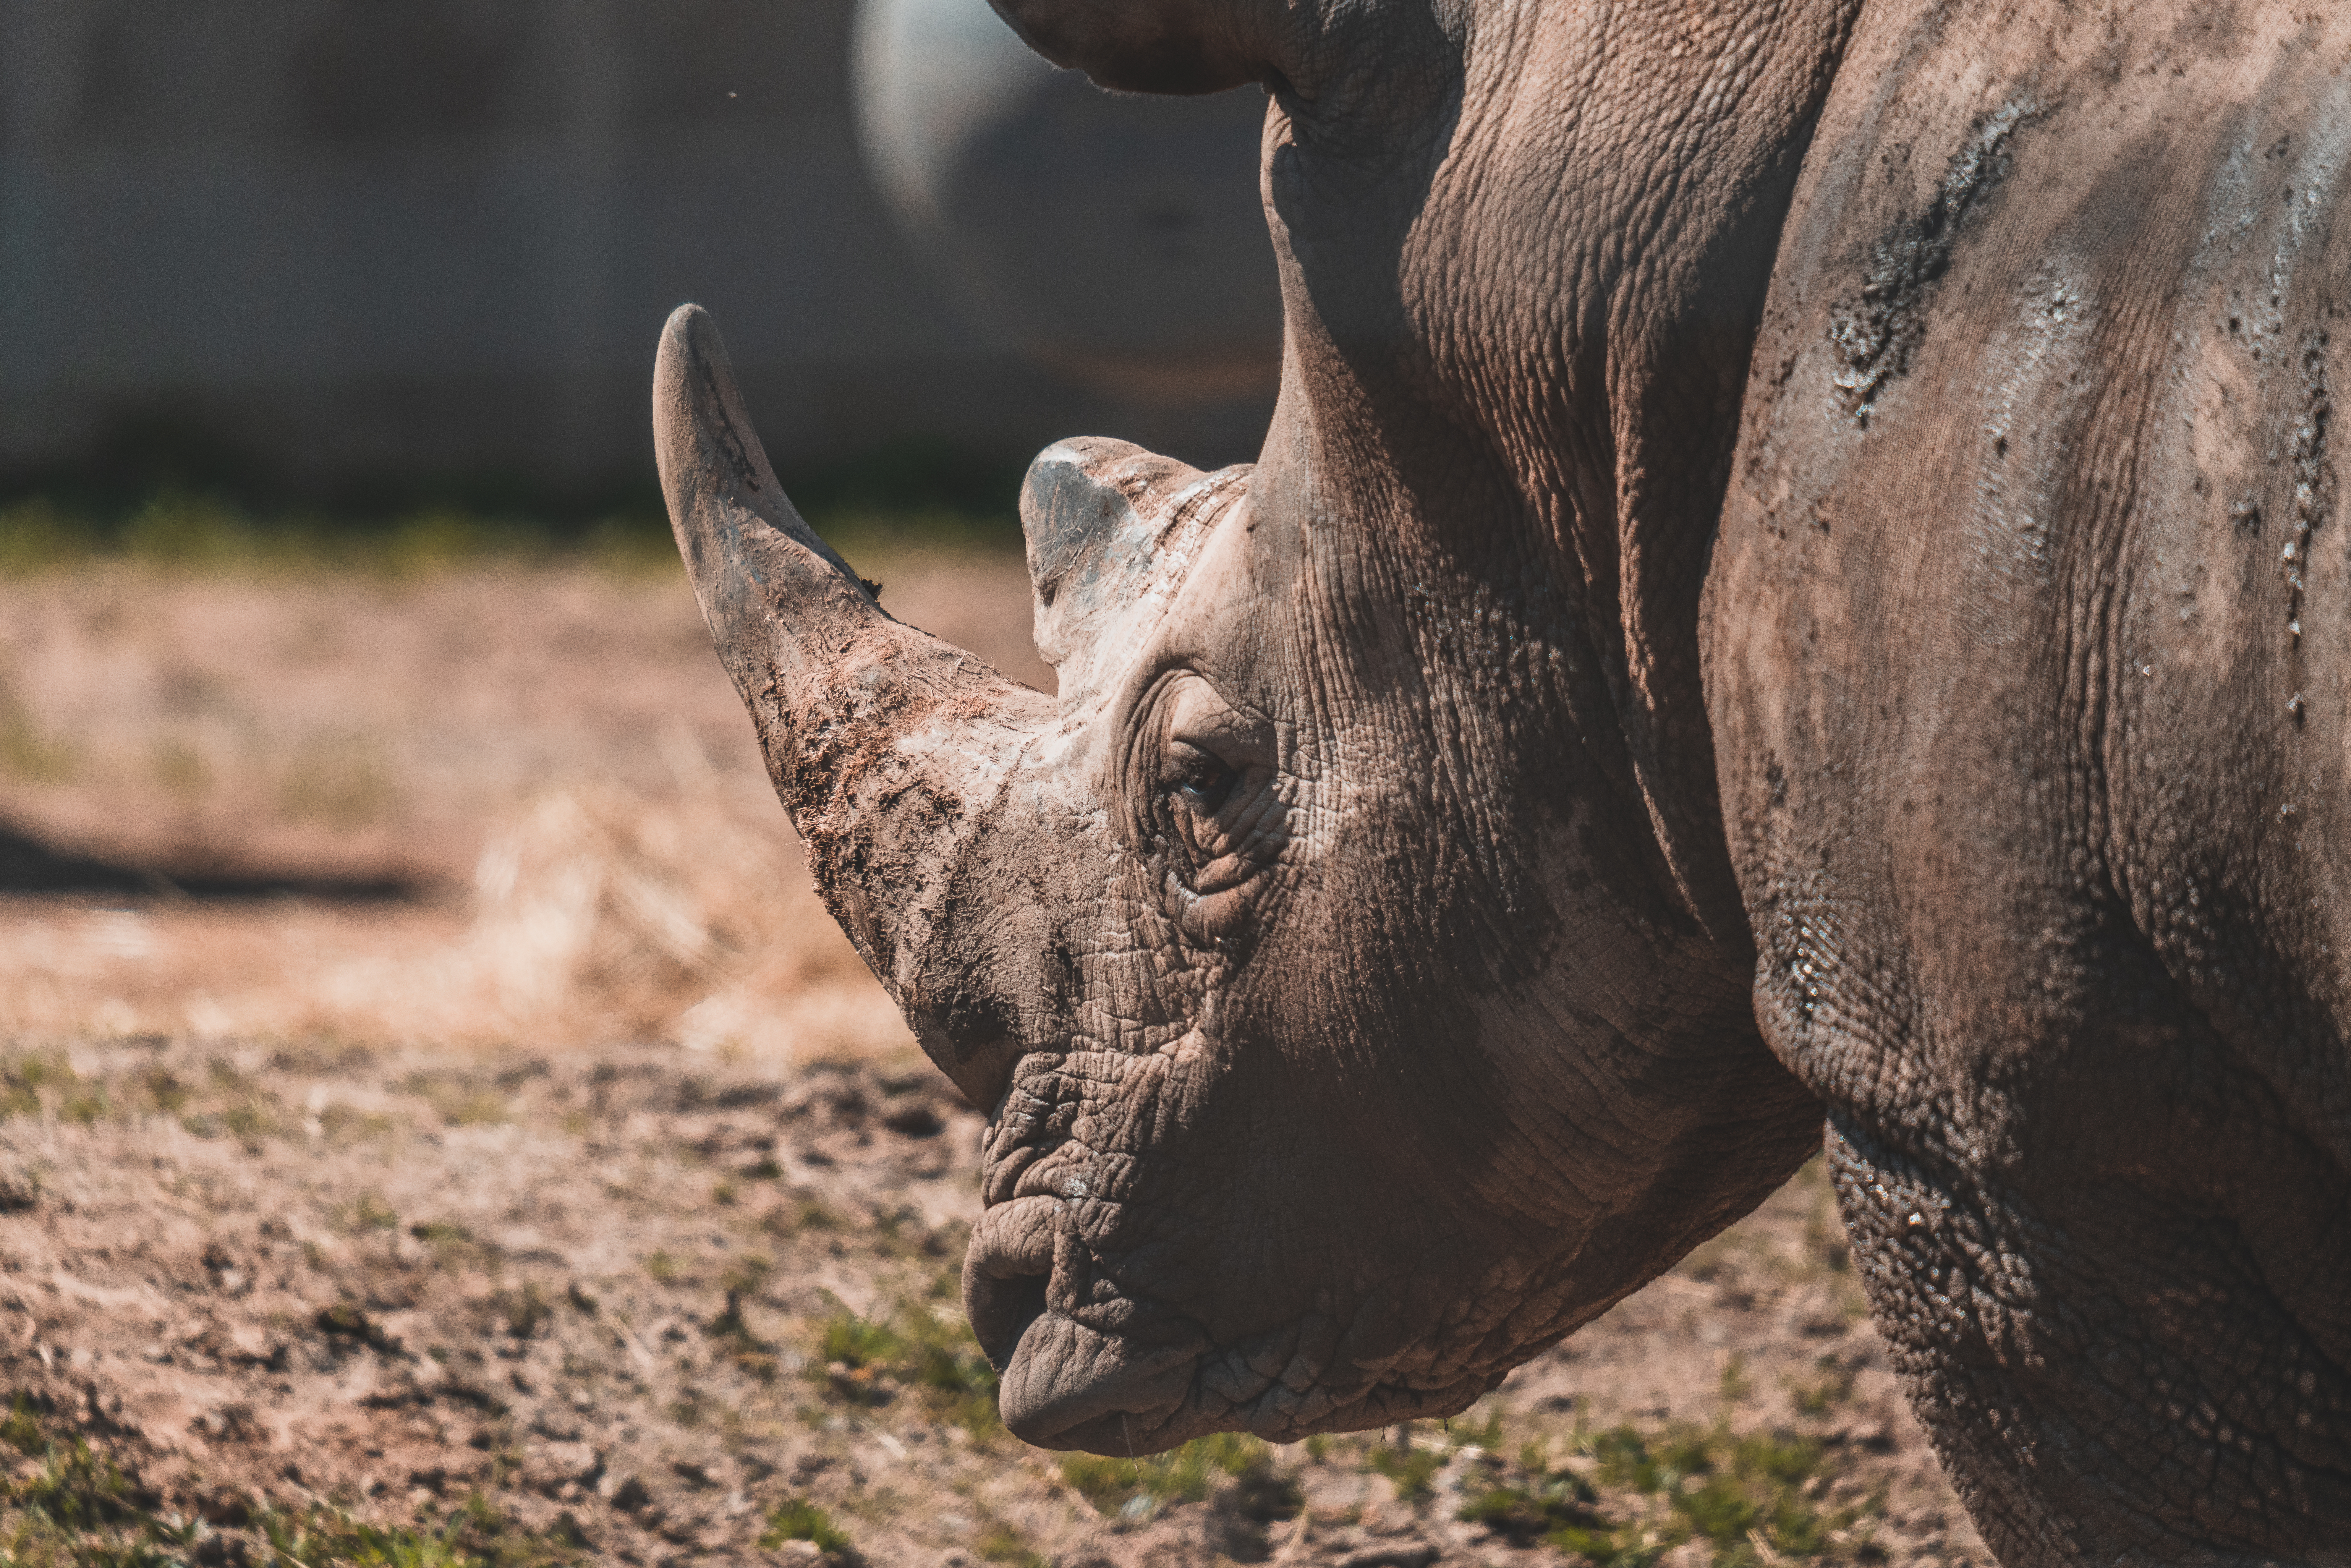 Rhino Jiwe Turns 7! Learn More About Him & His Care From One of His Keepers